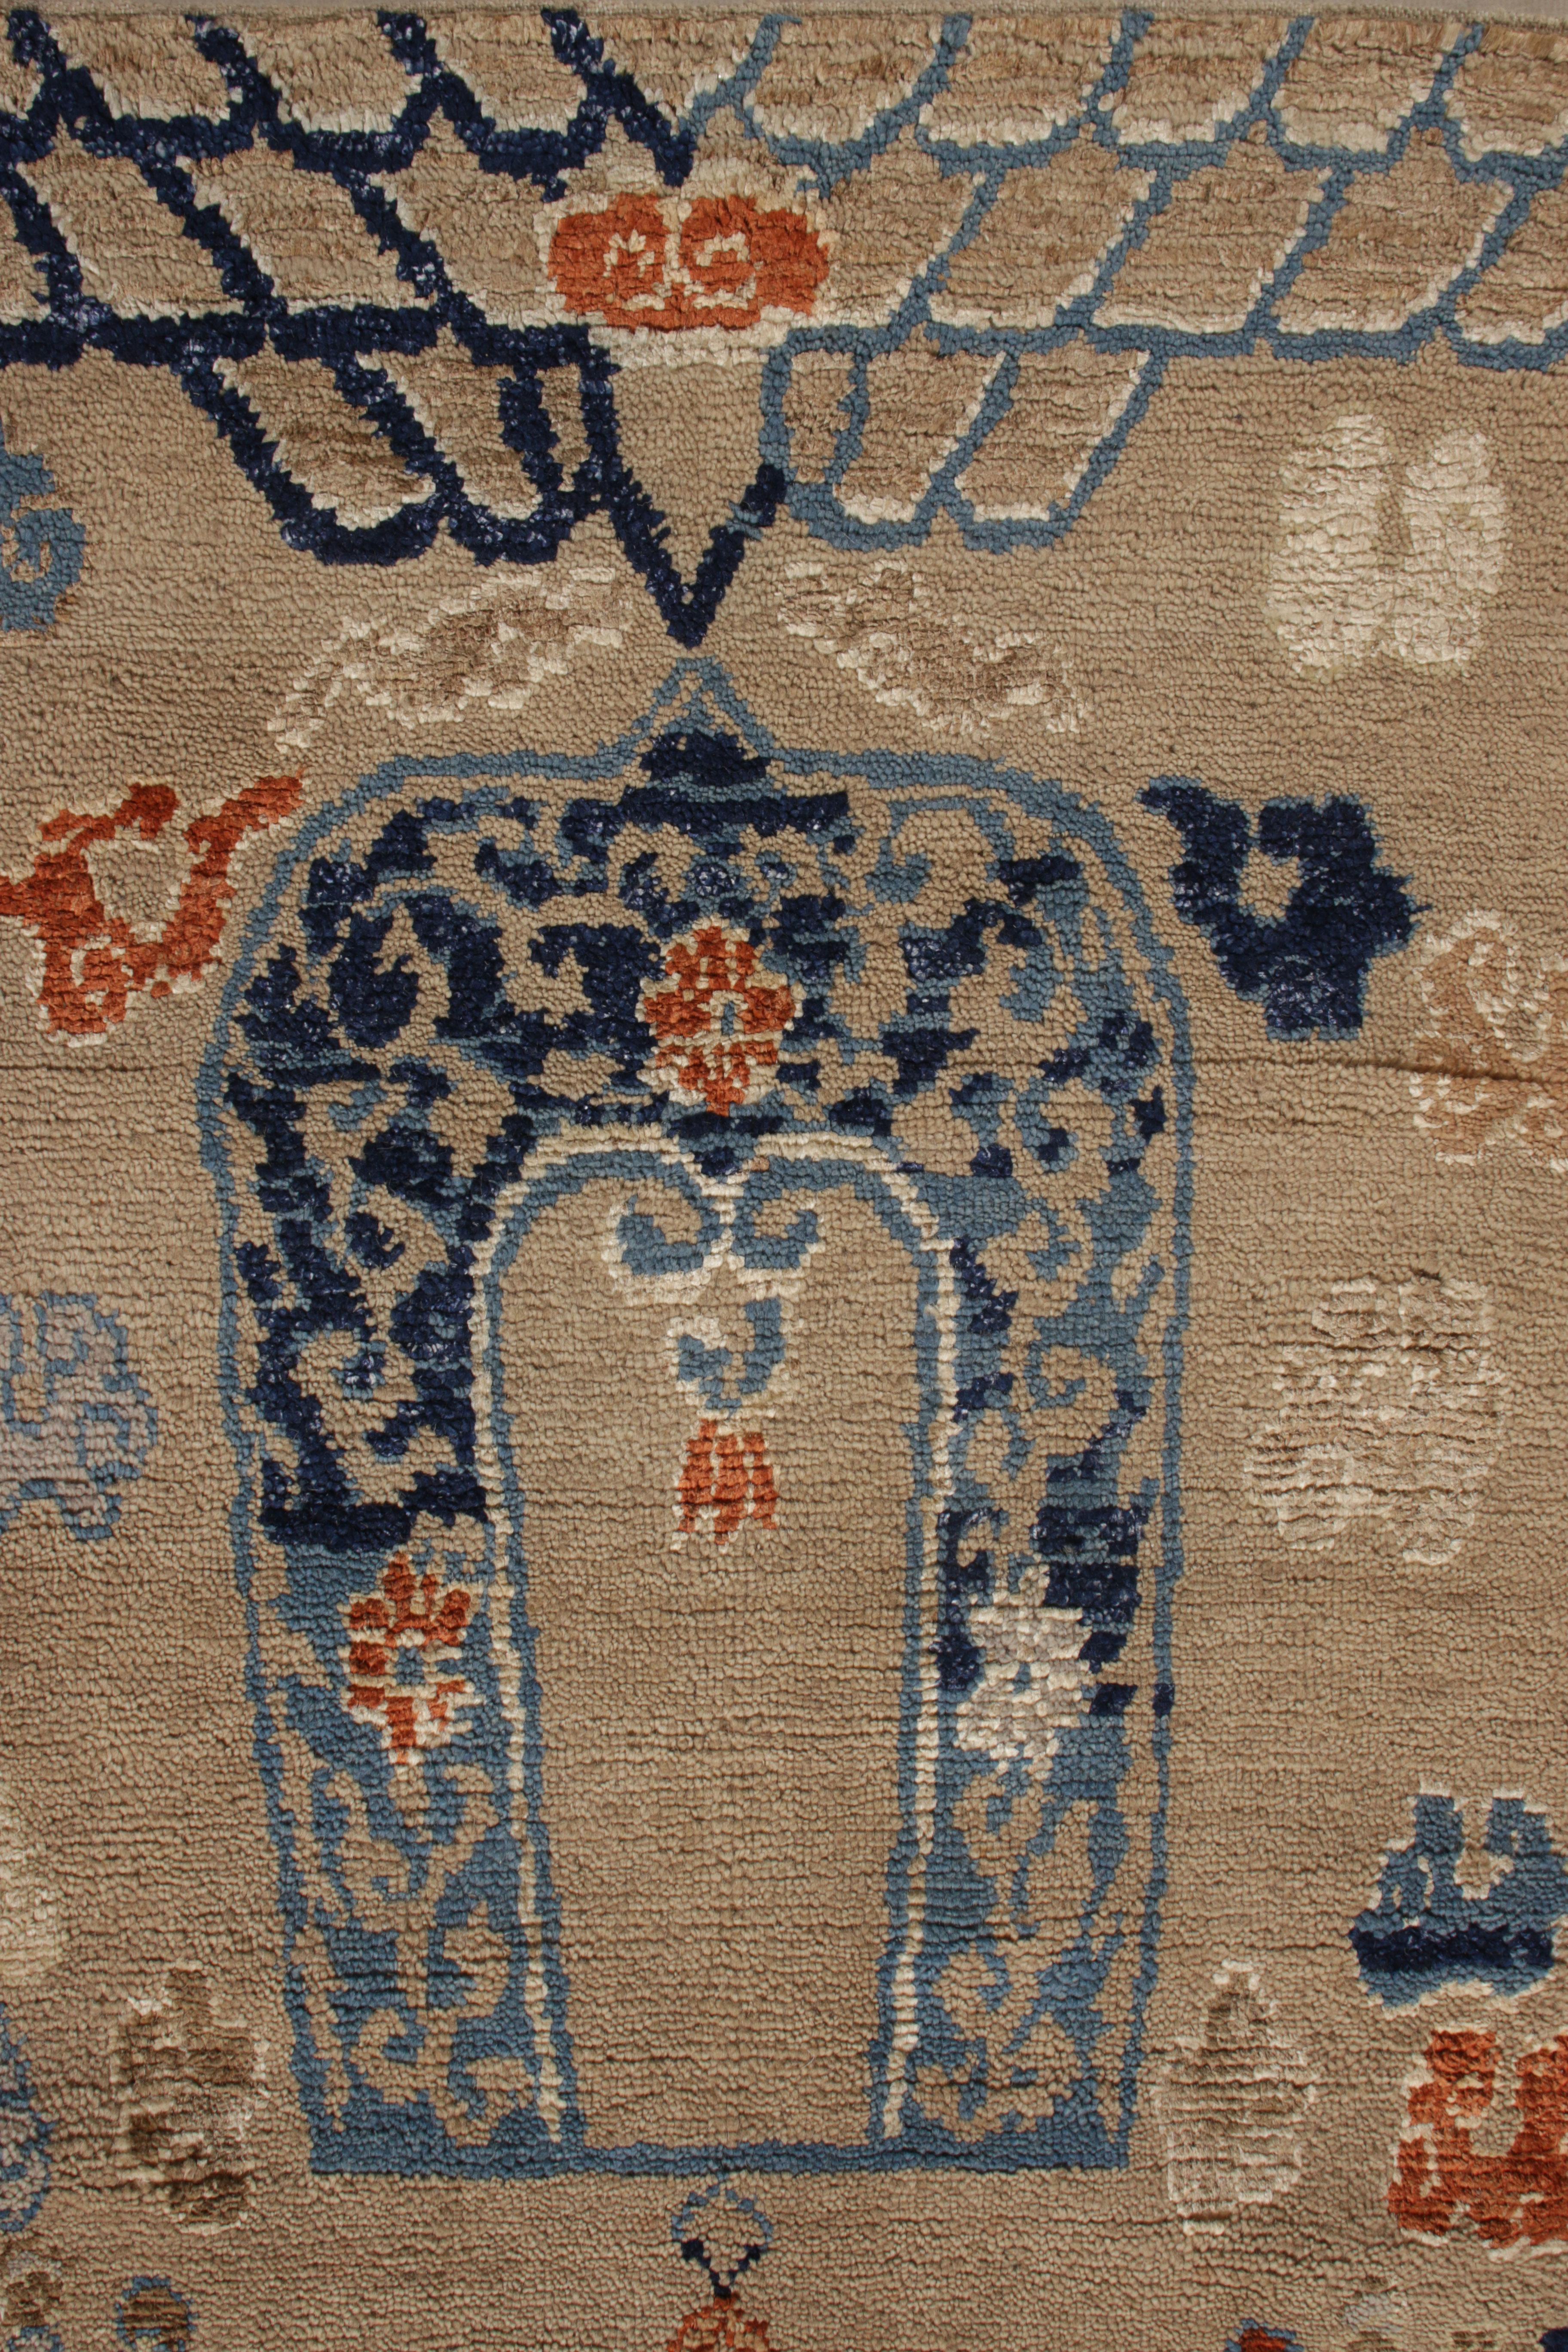 Indian Rug & Kilim’s Chinese Style Tiger Runner in Beige and Blue Pictorial Patterns